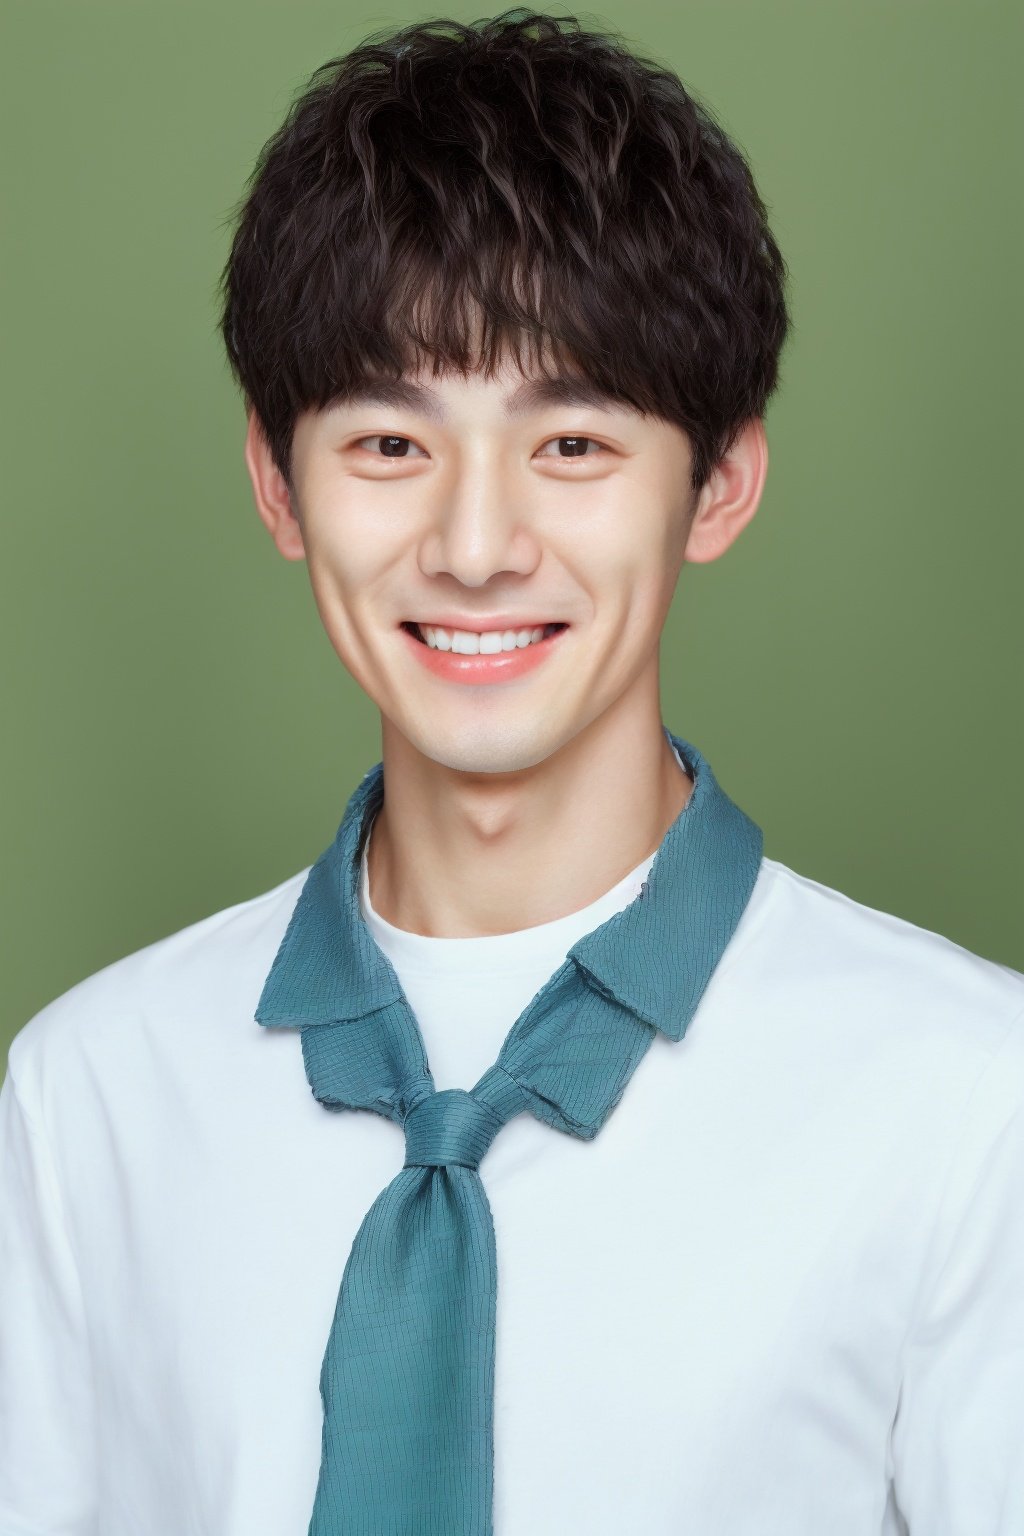 ID photo, a boy, solo, upper body, a short-haired man in a white shirt and red tie. She smiles at the camera, light green solid background, blue_IDphoto,真实,blue_IDphoto,照片